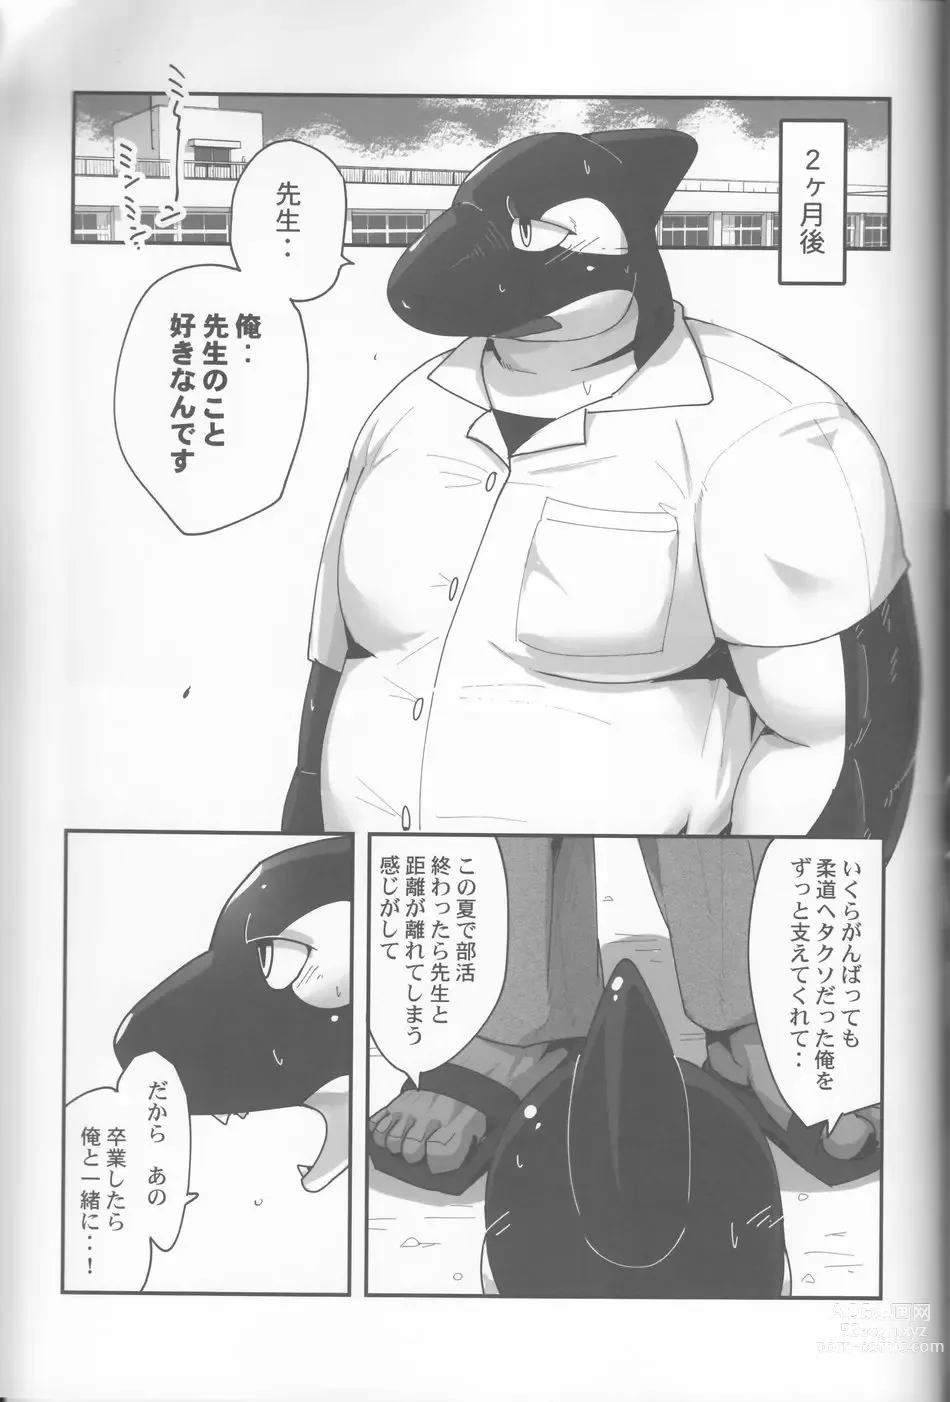 Page 40 of doujinshi The Janitor raises Cock slaves in the Staff Room